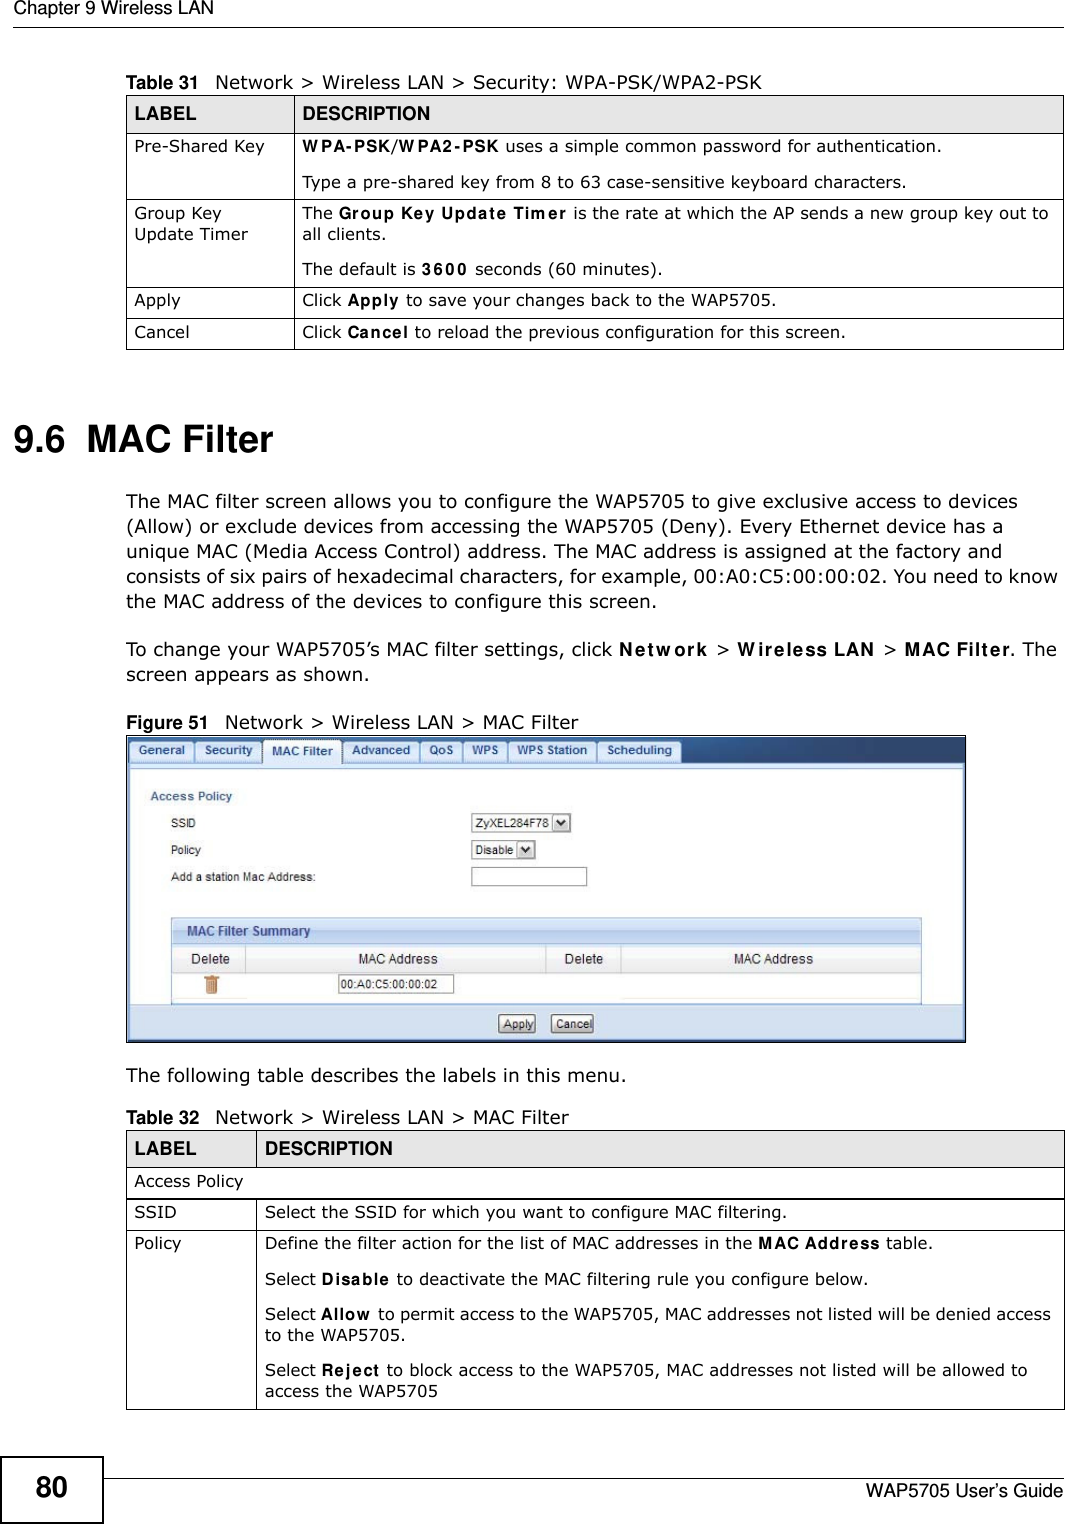 Chapter 9 Wireless LANWAP5705 User’s Guide809.6  MAC Filter   The MAC filter screen allows you to configure the WAP5705 to give exclusive access to devices (Allow) or exclude devices from accessing the WAP5705 (Deny). Every Ethernet device has a unique MAC (Media Access Control) address. The MAC address is assigned at the factory and consists of six pairs of hexadecimal characters, for example, 00:A0:C5:00:00:02. You need to know the MAC address of the devices to configure this screen.To change your WAP5705’s MAC filter settings, click N e t w o rk  &gt; W ir ele ss LAN &gt; MAC Filt er. The screen appears as shown.Figure 51   Network &gt; Wireless LAN &gt; MAC FilterThe following table describes the labels in this menu.Pre-Shared Key  W PA- PSK/W PA2 - PSK uses a simple common password for authentication.Type a pre-shared key from 8 to 63 case-sensitive keyboard characters.Group Key Update TimerThe Gr oup Key  Updat e Tim er  is the rate at which the AP sends a new group key out to all clients. The default is 3 6 0 0  seconds (60 minutes).Apply Click Apply to save your changes back to the WAP5705.Cancel Click Cancel to reload the previous configuration for this screen.Table 31   Network &gt; Wireless LAN &gt; Security: WPA-PSK/WPA2-PSKLABEL DESCRIPTIONTable 32   Network &gt; Wireless LAN &gt; MAC FilterLABEL DESCRIPTIONAccess PolicySSID Select the SSID for which you want to configure MAC filtering.Policy  Define the filter action for the list of MAC addresses in the MAC Addre ss table. Select Disa ble to deactivate the MAC filtering rule you configure below.Select Allow  to permit access to the WAP5705, MAC addresses not listed will be denied access to the WAP5705. Select Re j e ct to block access to the WAP5705, MAC addresses not listed will be allowed to access the WAP5705 